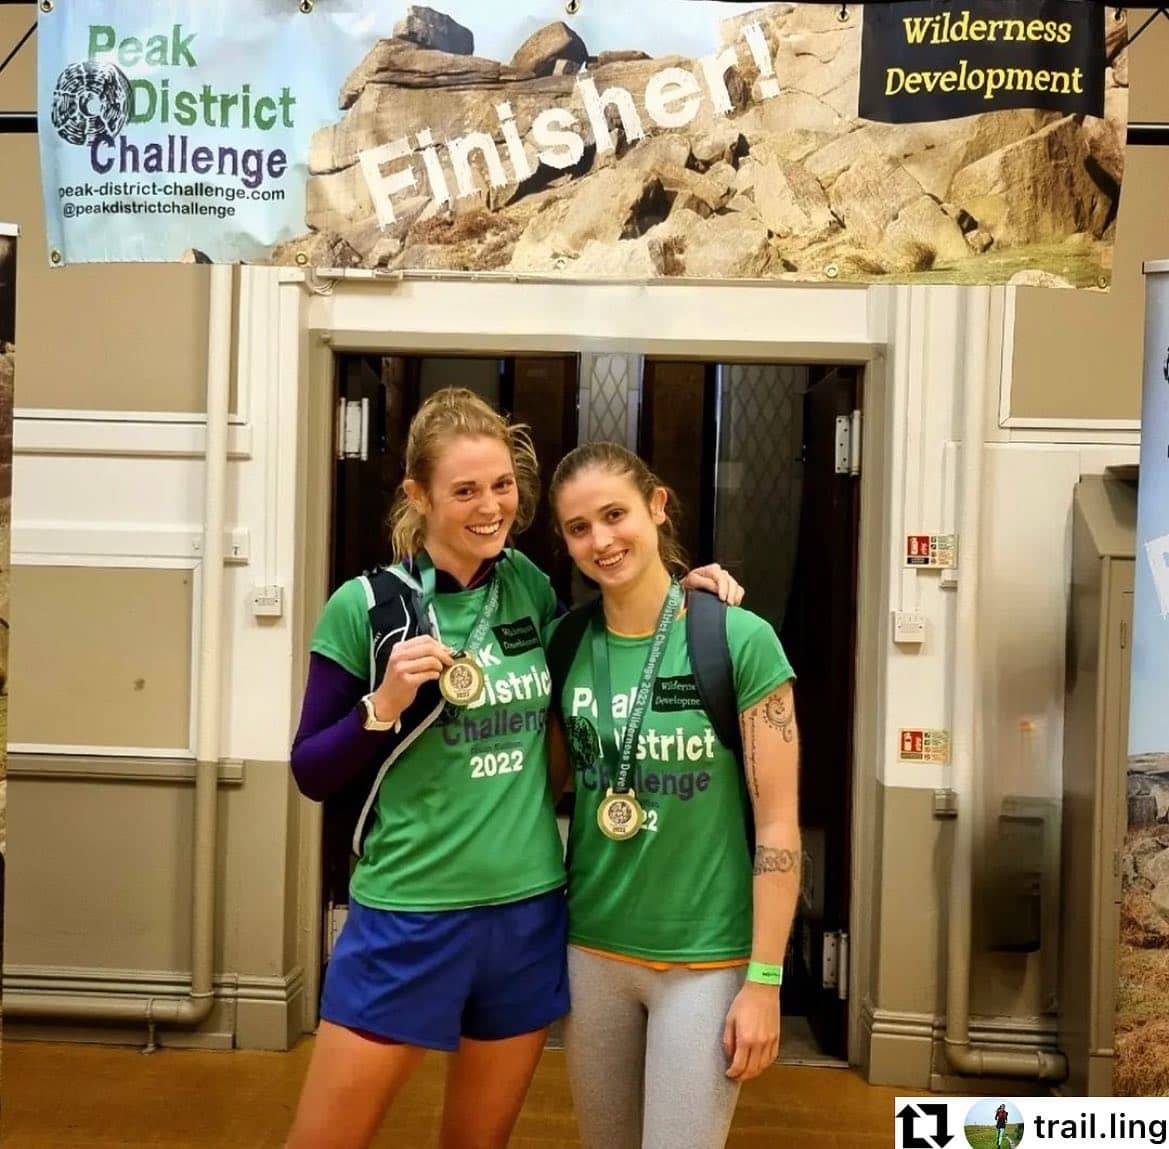 Repost from @trail.ling 

First ever fell race and came in as 2nd female (after winning a sprint ...